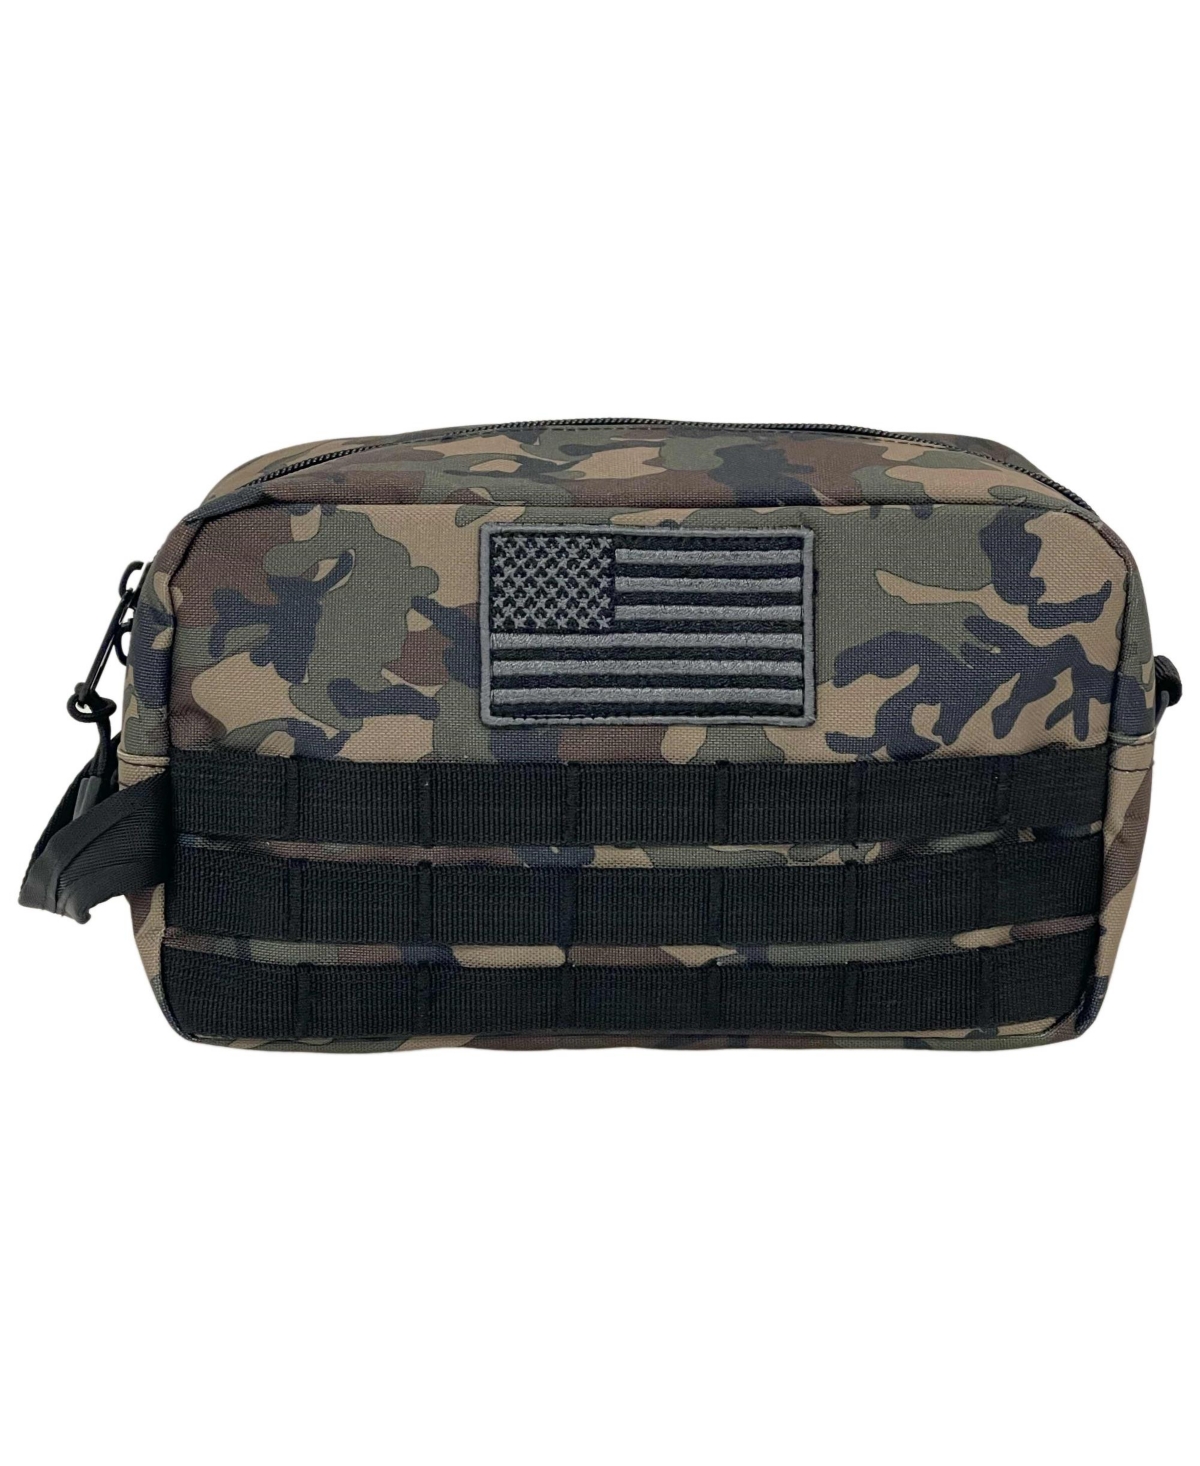 Men's Recon Tactical Travel Kit - Traditional Camo